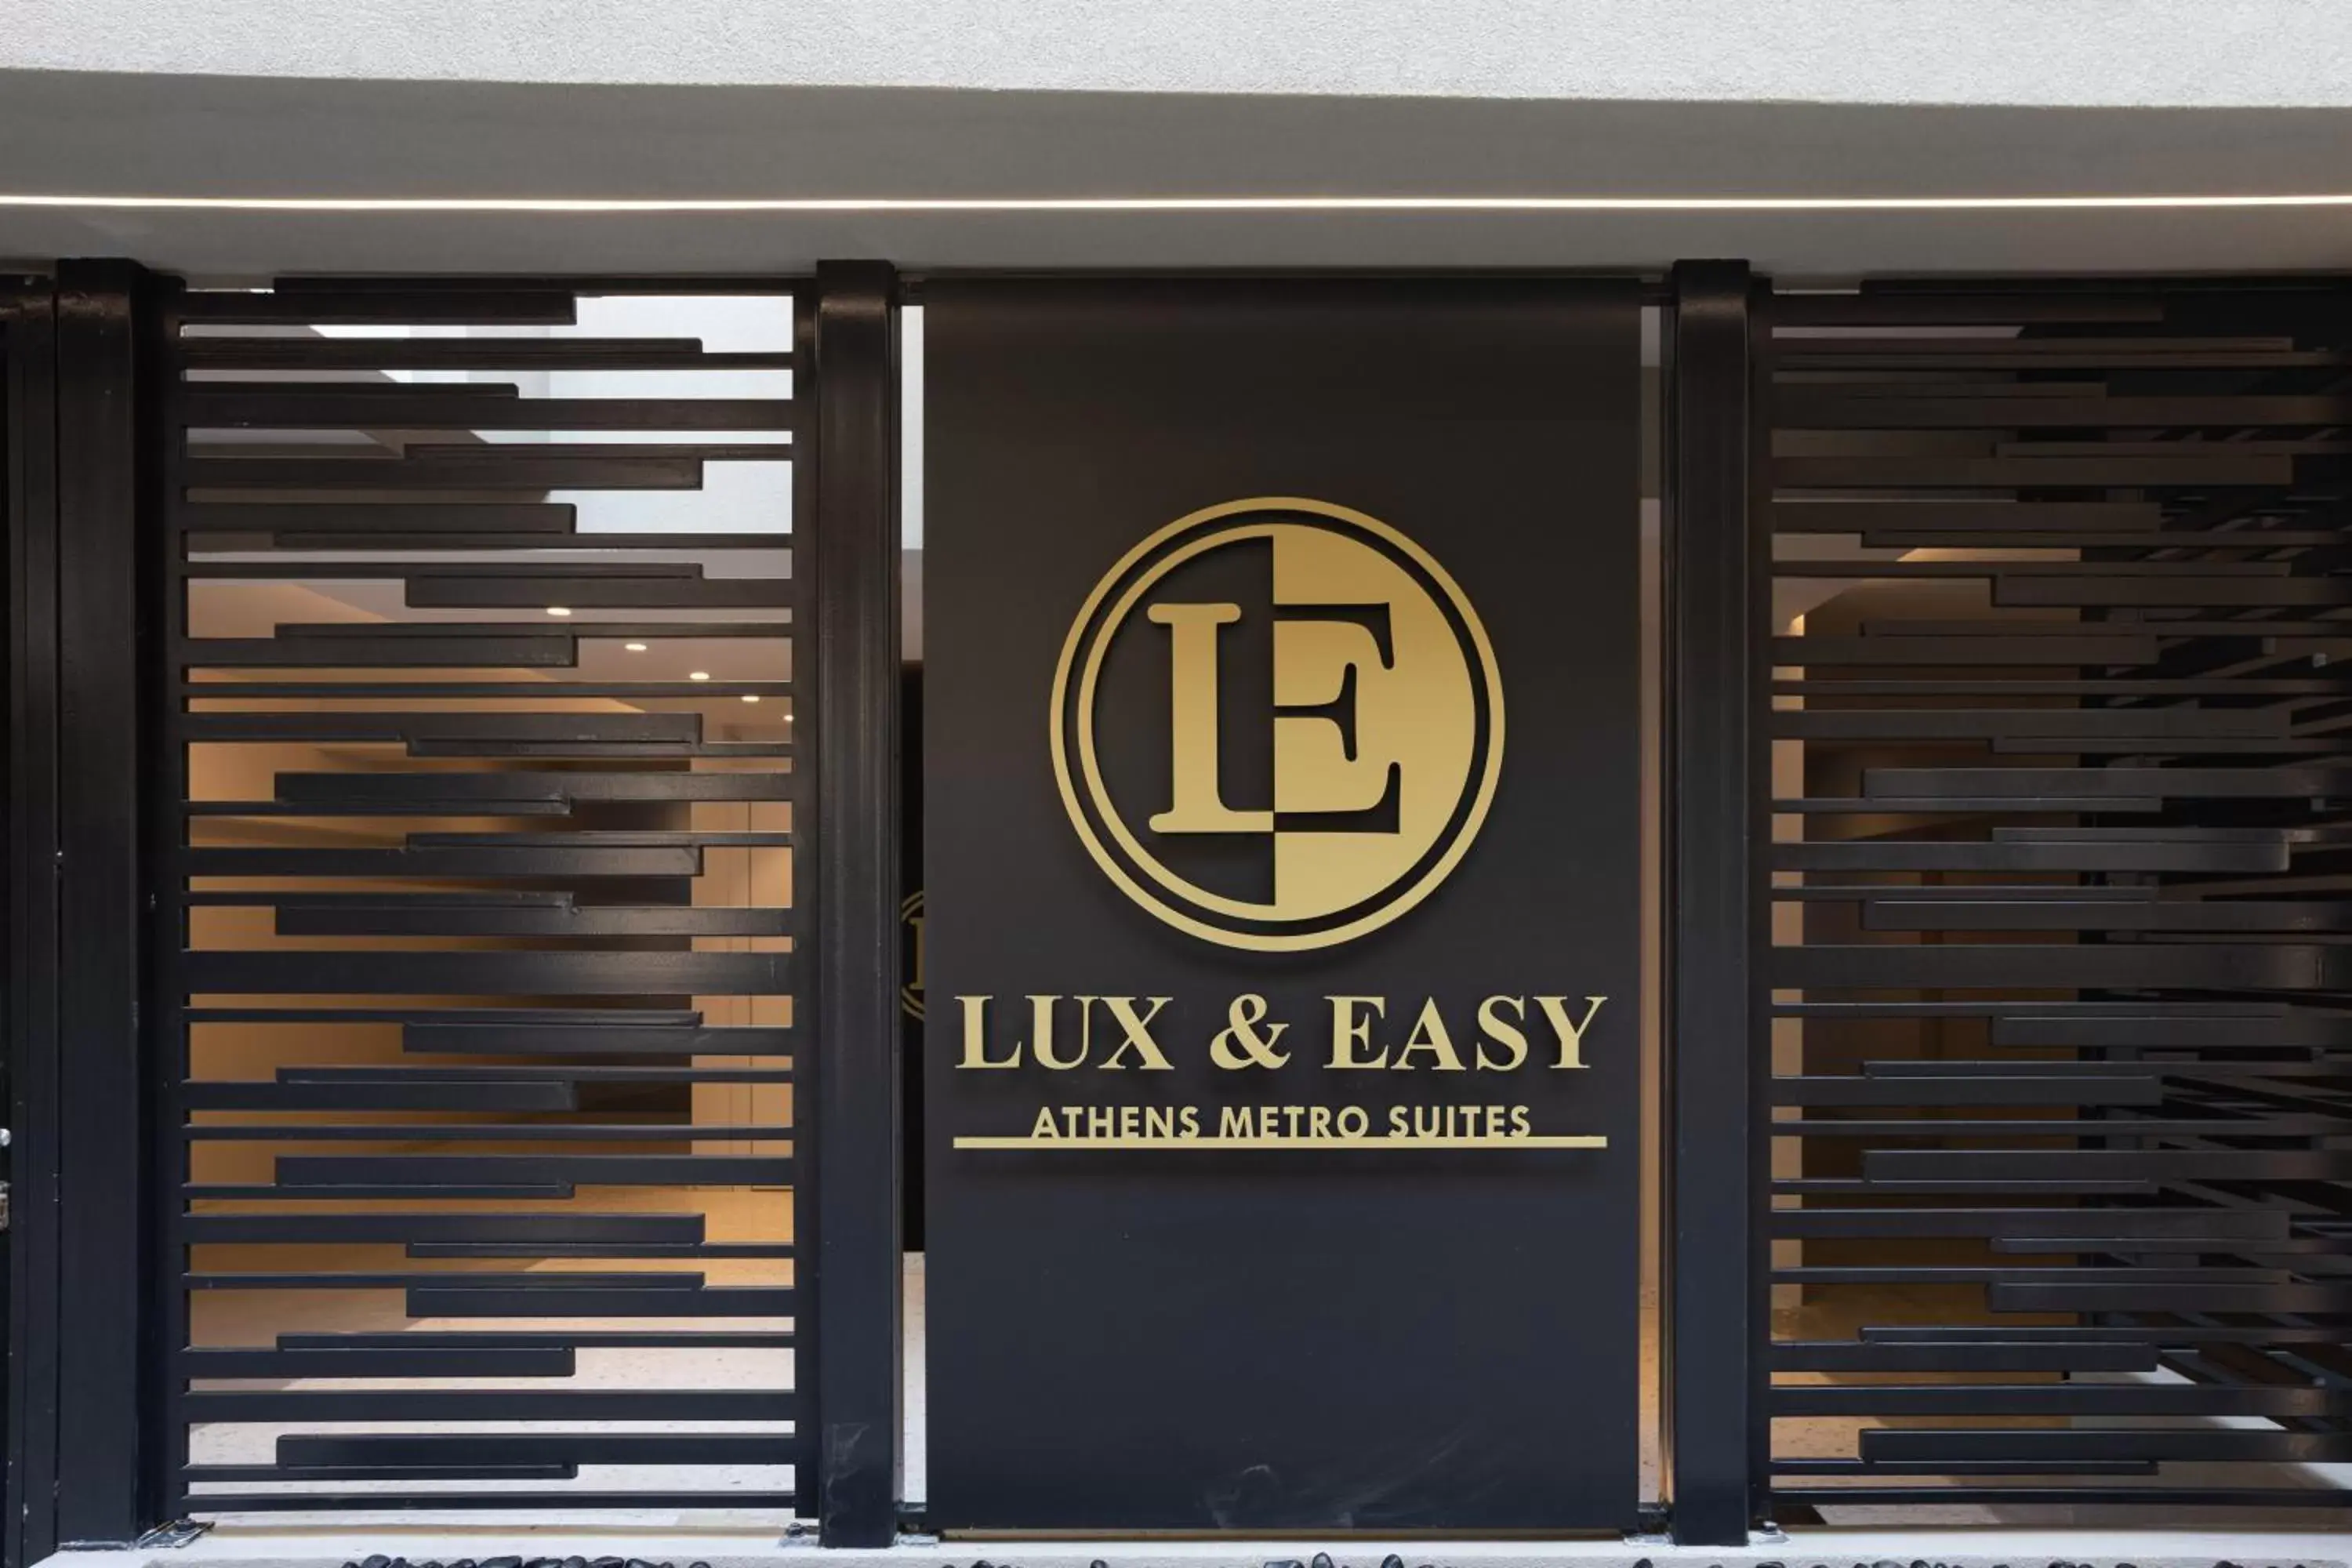 Property logo or sign in LUX&EASY Athens Metro Suites